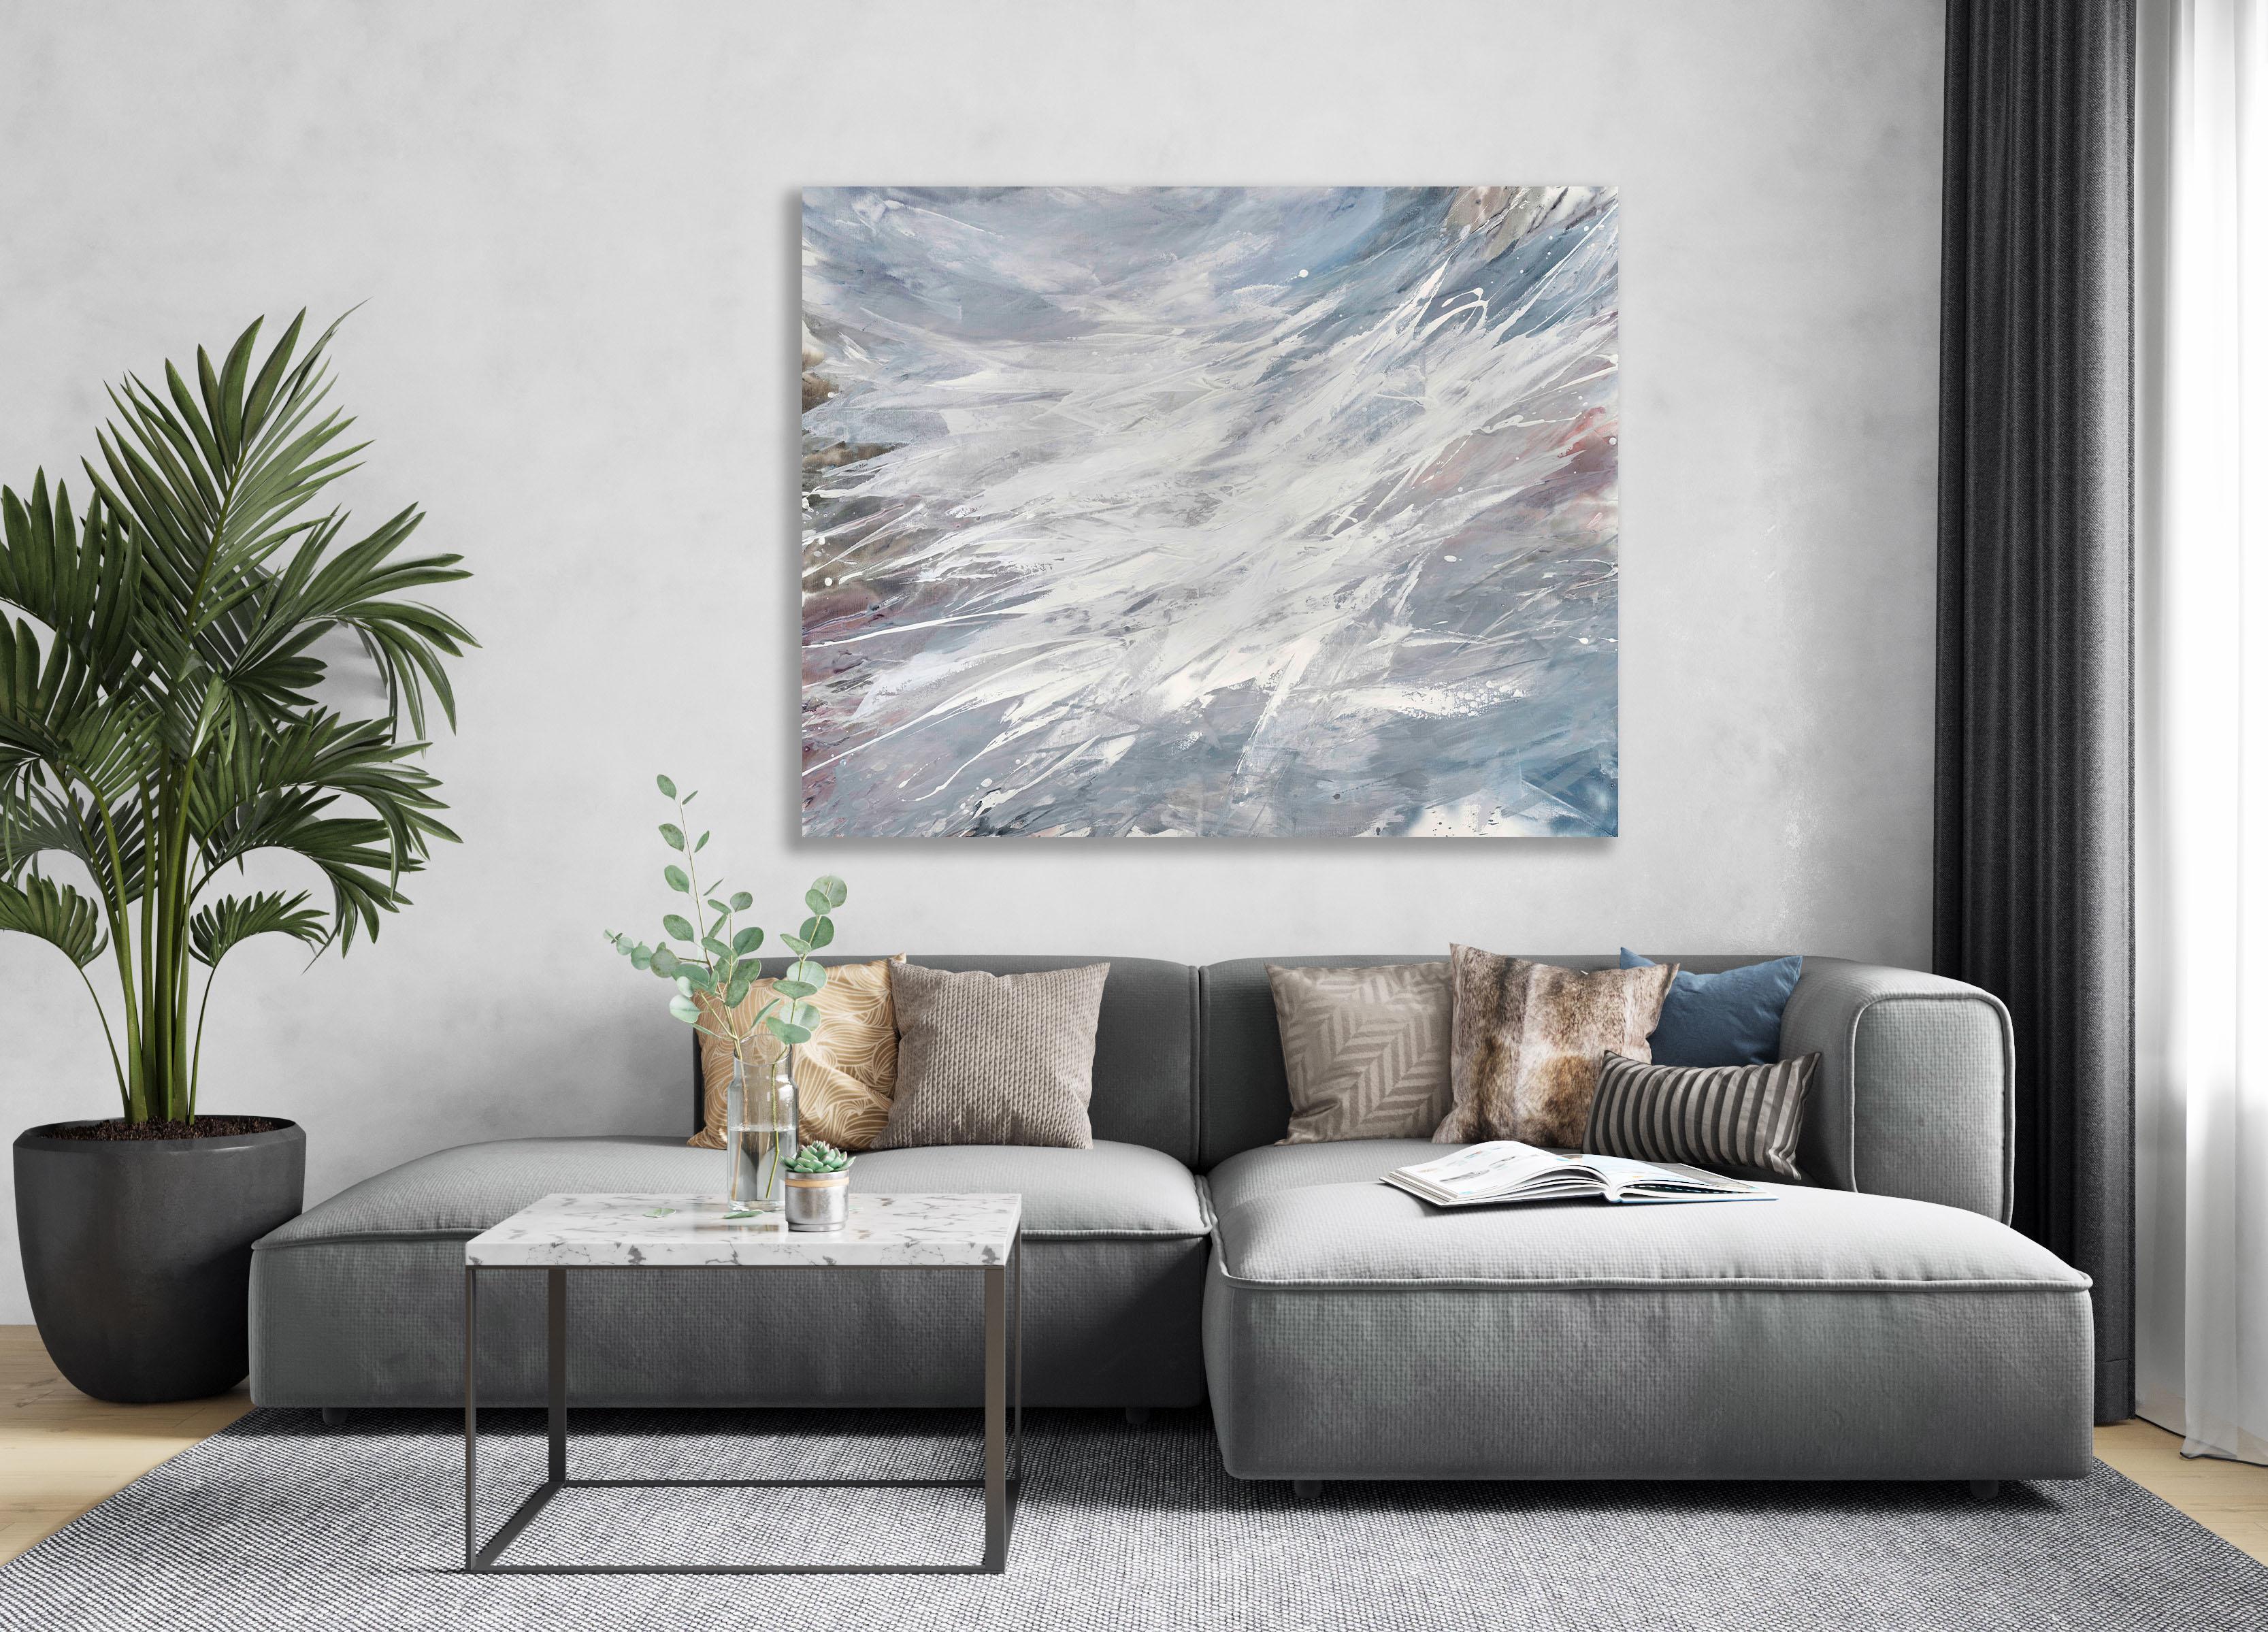 This contemporary abstract statement painting by Teodora Guererra is made with acrylic paint on gallery wrapped canvas. It features a cool, neutral grey palette, with layers of paint applied in large sweeping gestures. The painting has clean white